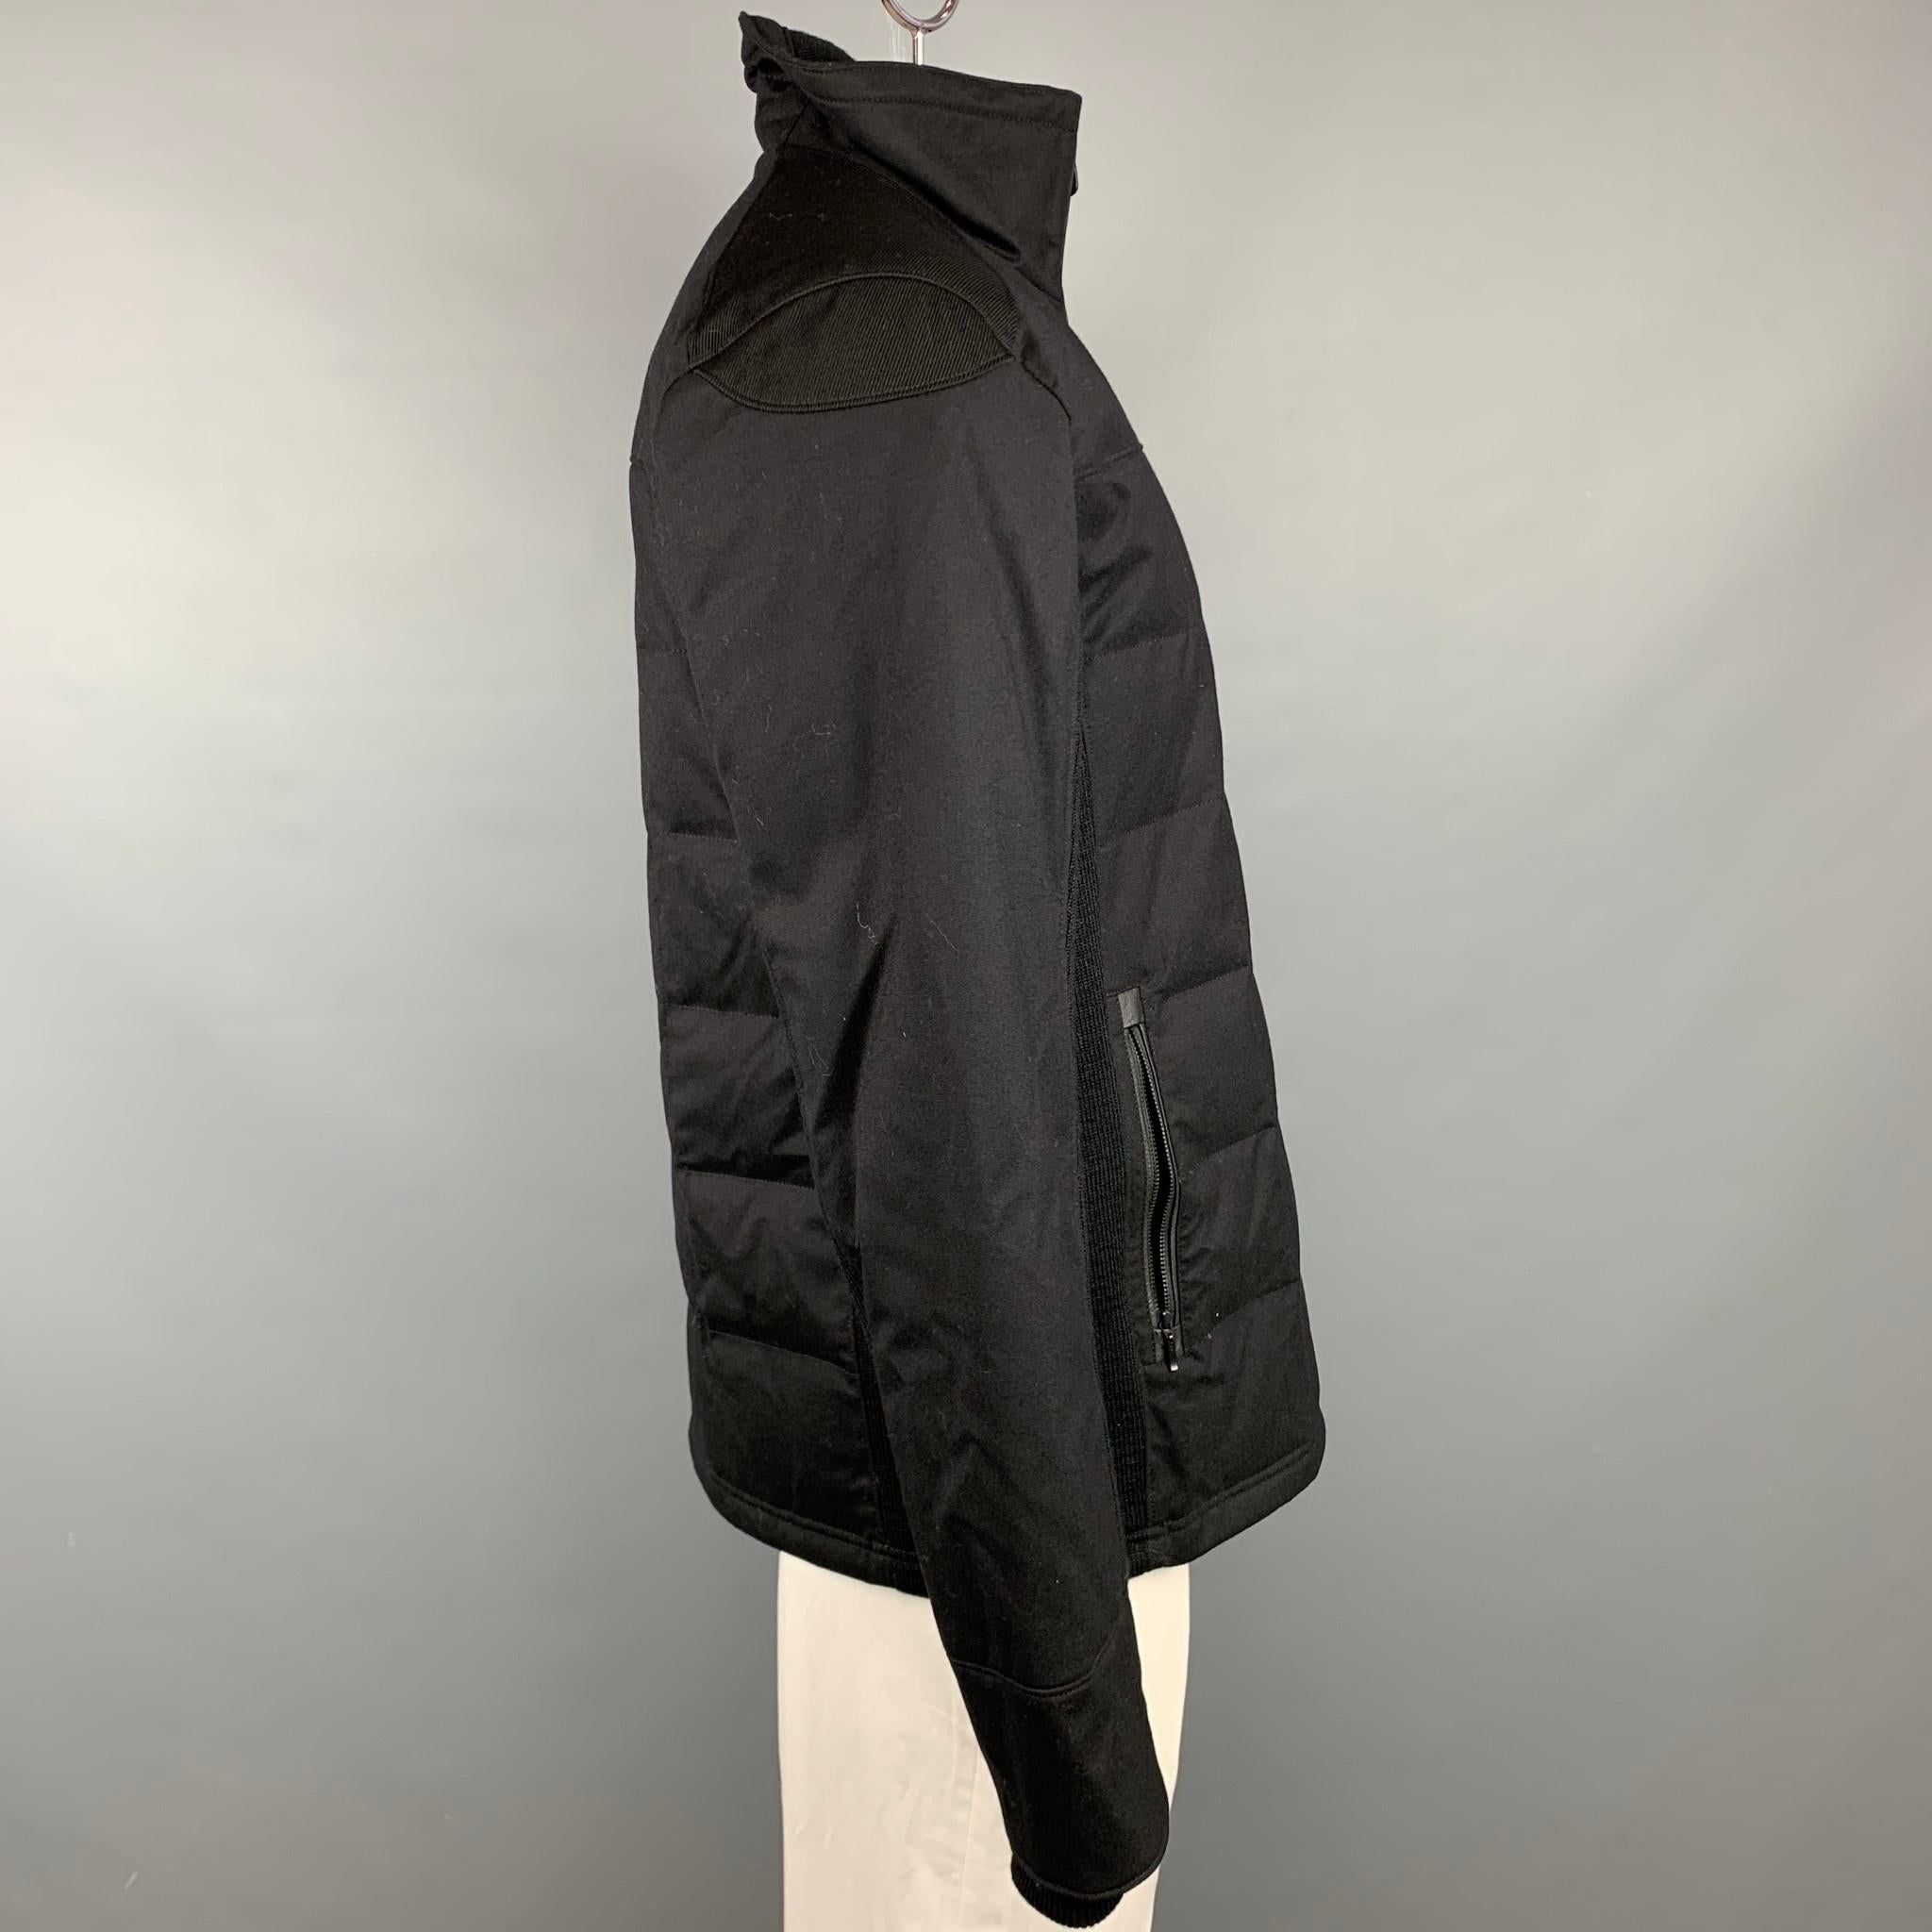 CANADA GOOSE jacket comes in a black wool with ribbed sides featuring a high collar, zipper pockets, and  a full zip up closure. Made in Canada.

Very Good Pre-Owned Condition.
Marked: XL

Measurements:

Shoulder: 20 in.
Chest: 44 in.
Sleeve: 28